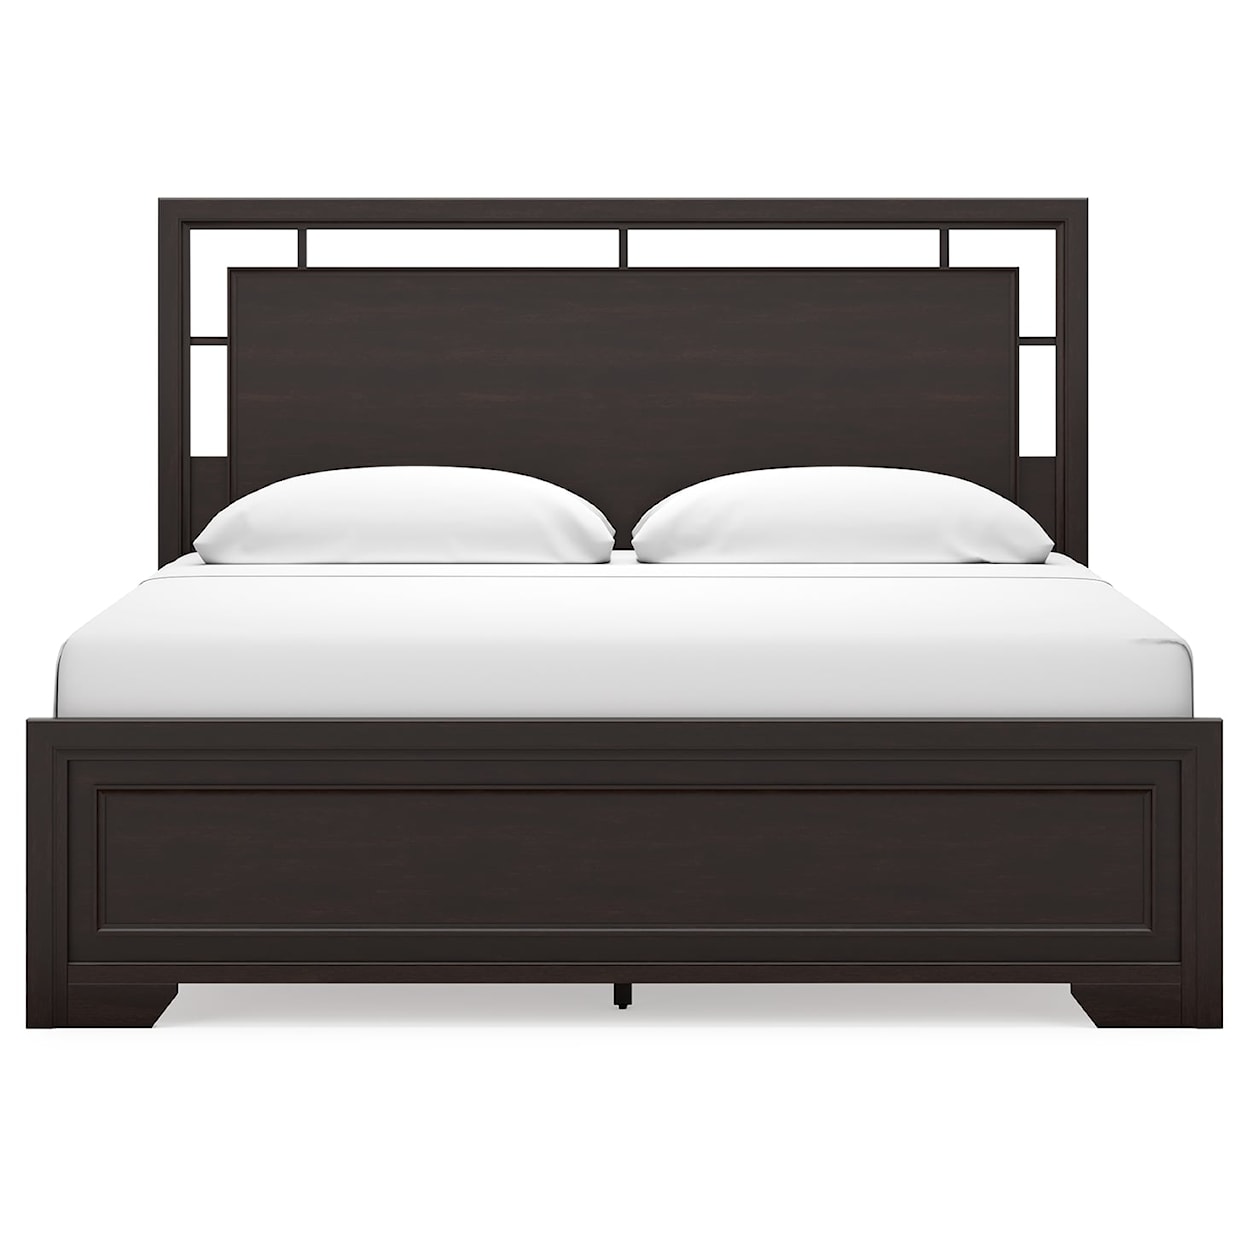 Benchcraft Covetown King Panel Bed